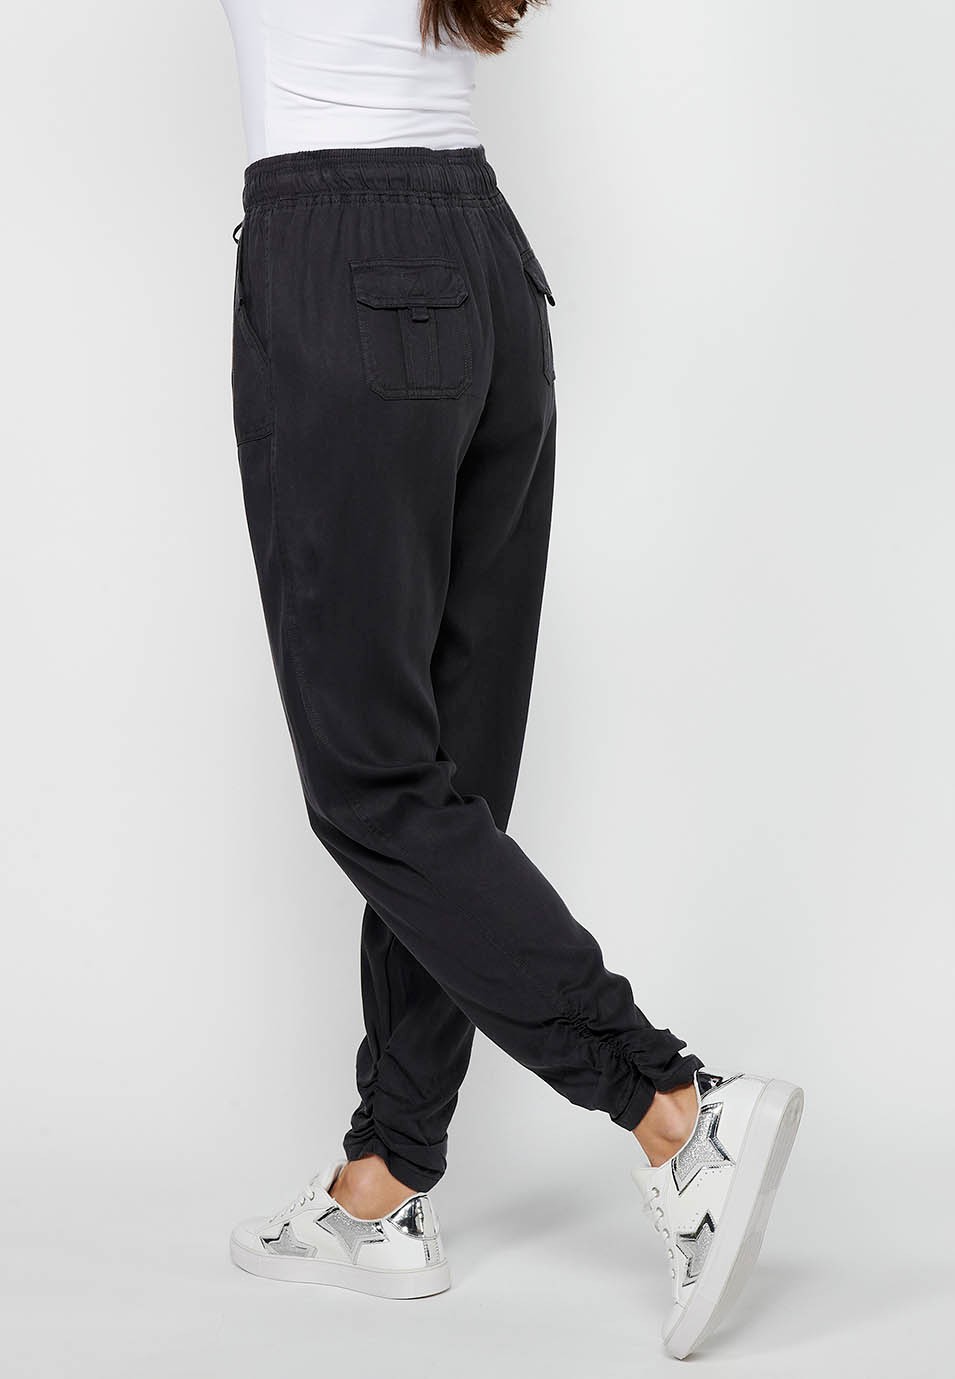 Long jogger pants with curled finish and rubberized waist with four pockets, two at the back with flap in Black for Women 8